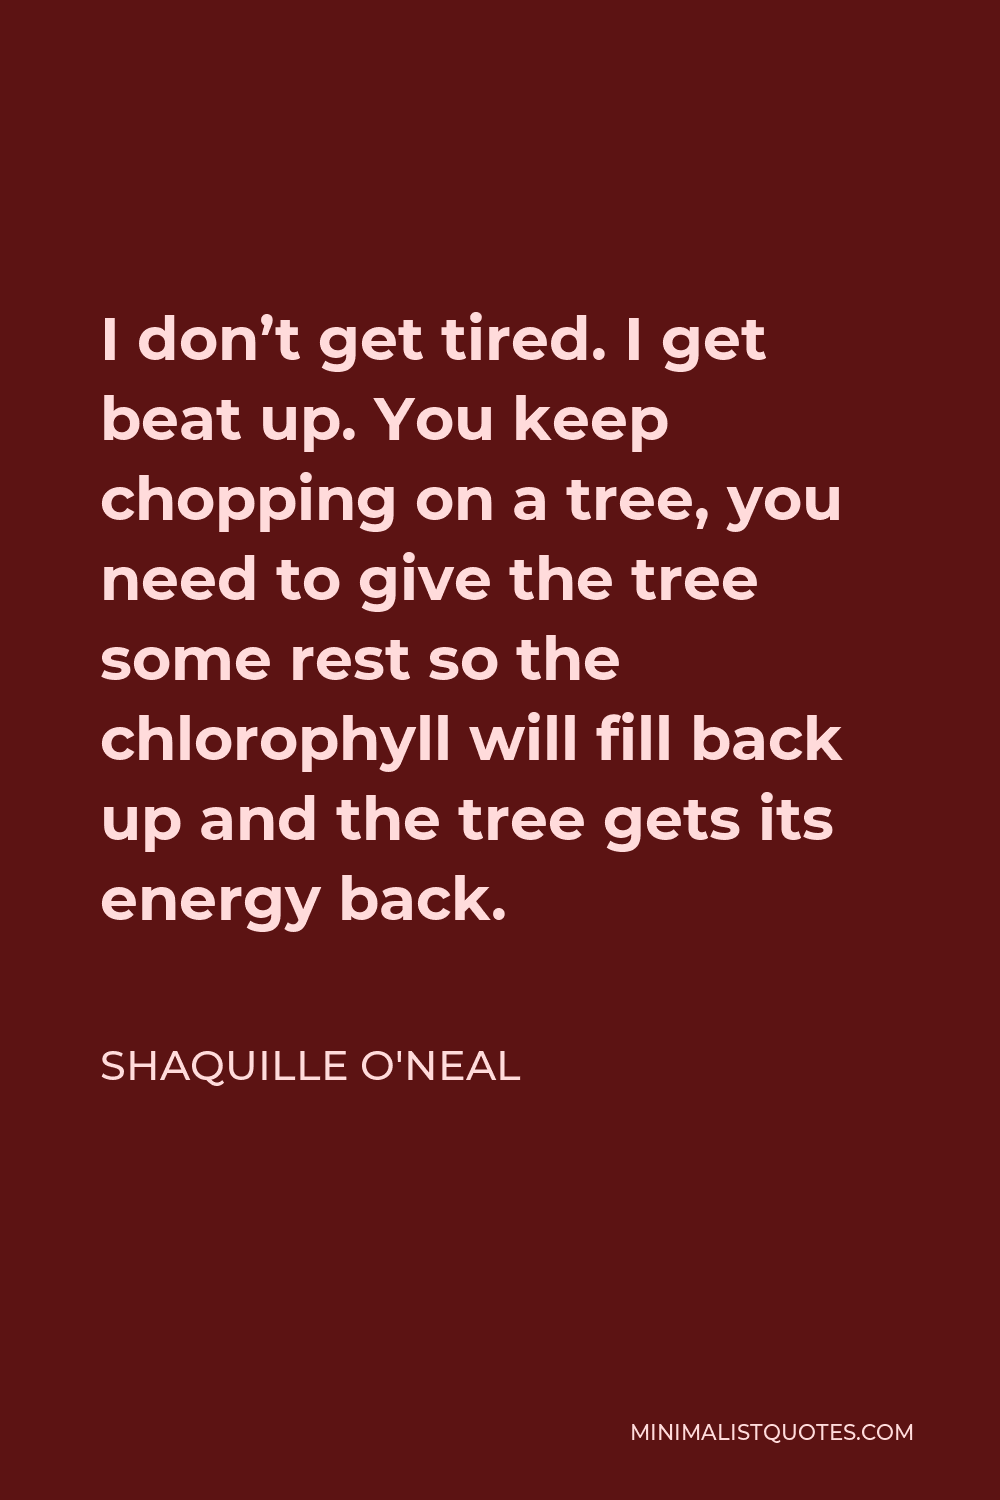 Shaquille O'Neal Quote - I don’t get tired. I get beat up. You keep chopping on a tree, you need to give the tree some rest so the chlorophyll will fill back up and the tree gets its energy back.